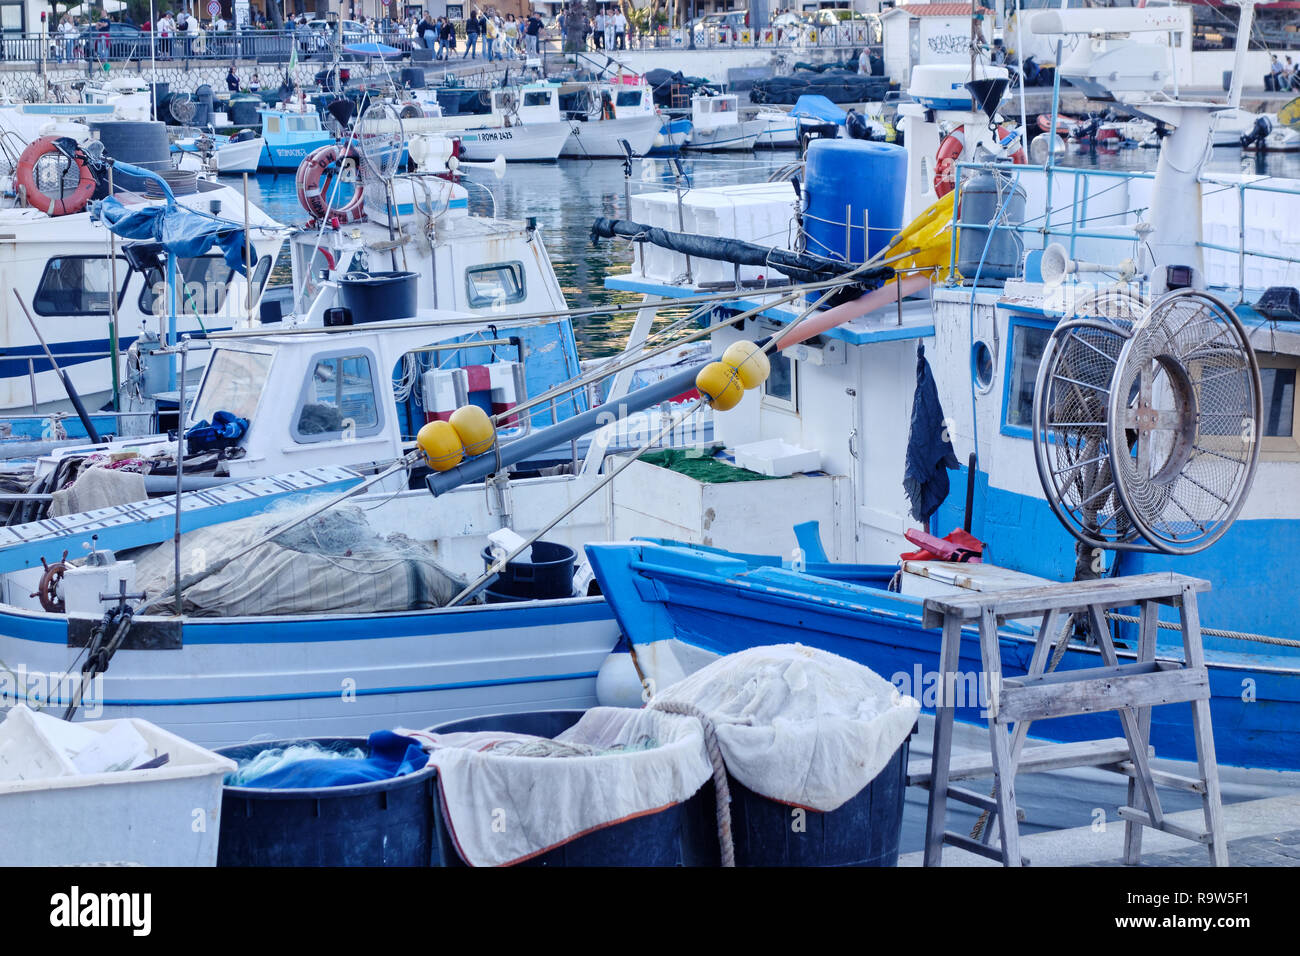 Anzio, Italy - August 2014: Boats in the harbour at twilight Stock Photo